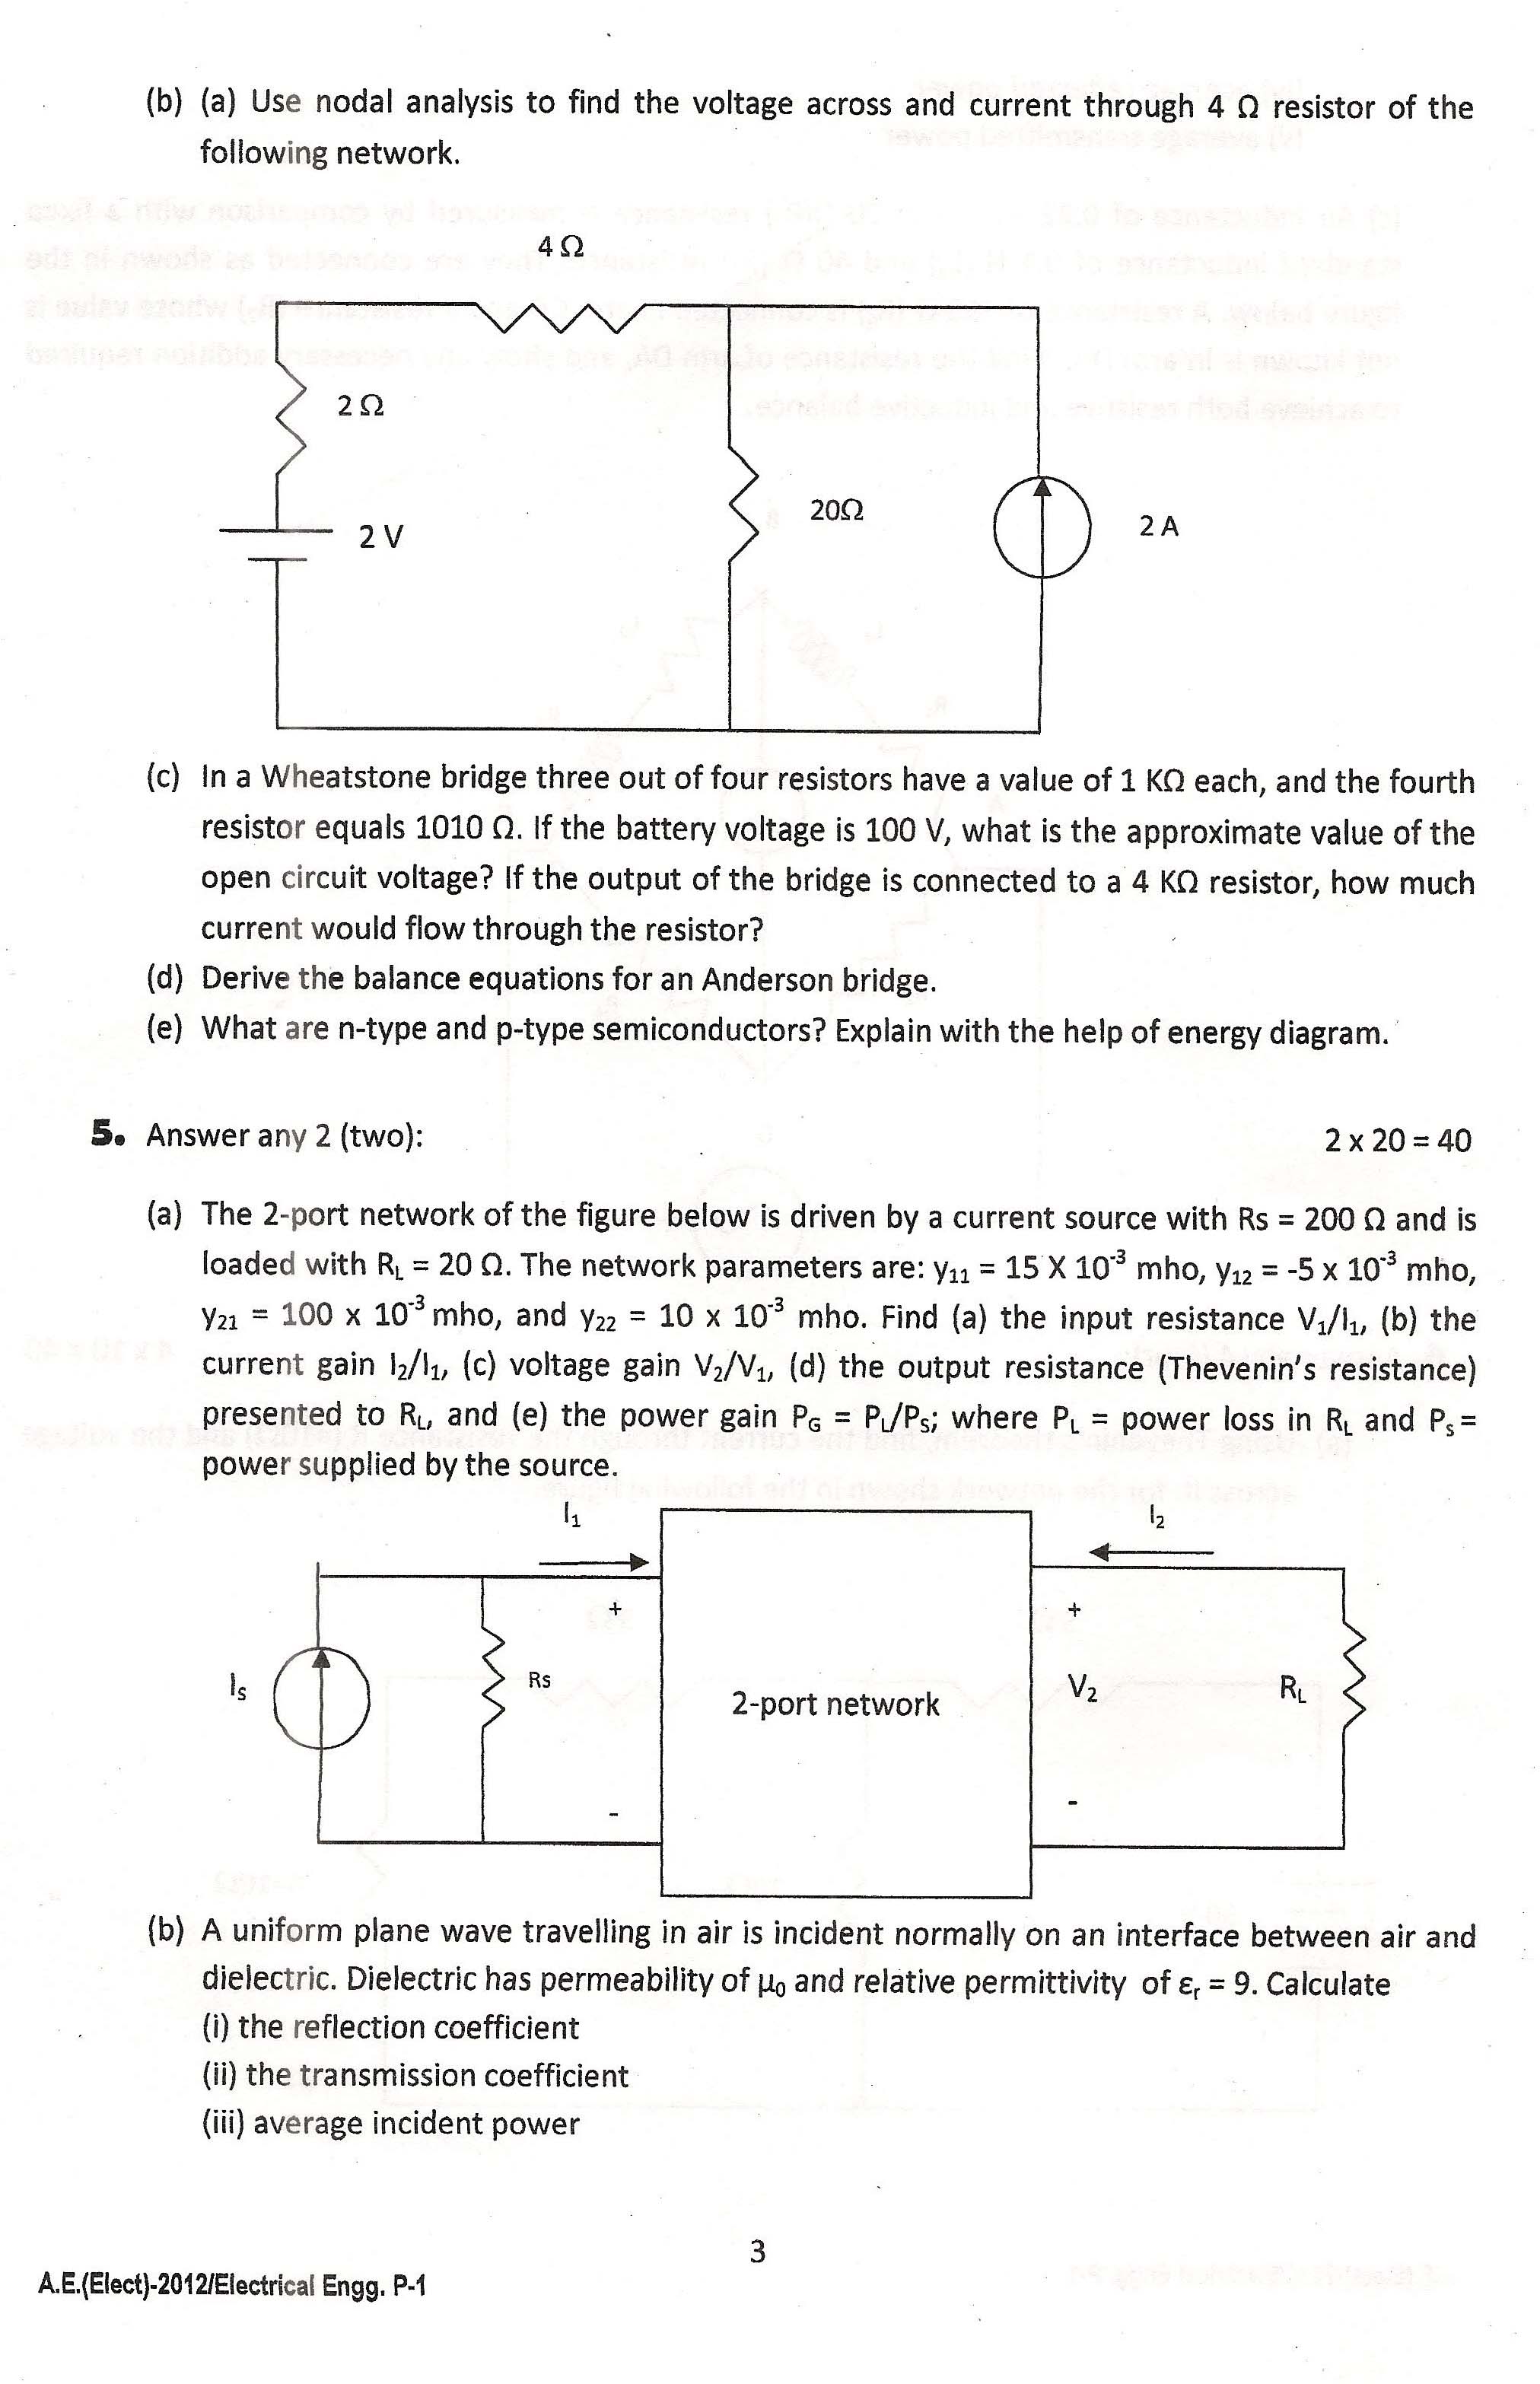 APPSC AE Electrical Exam 2012 Electrical Engineering Paper I 3